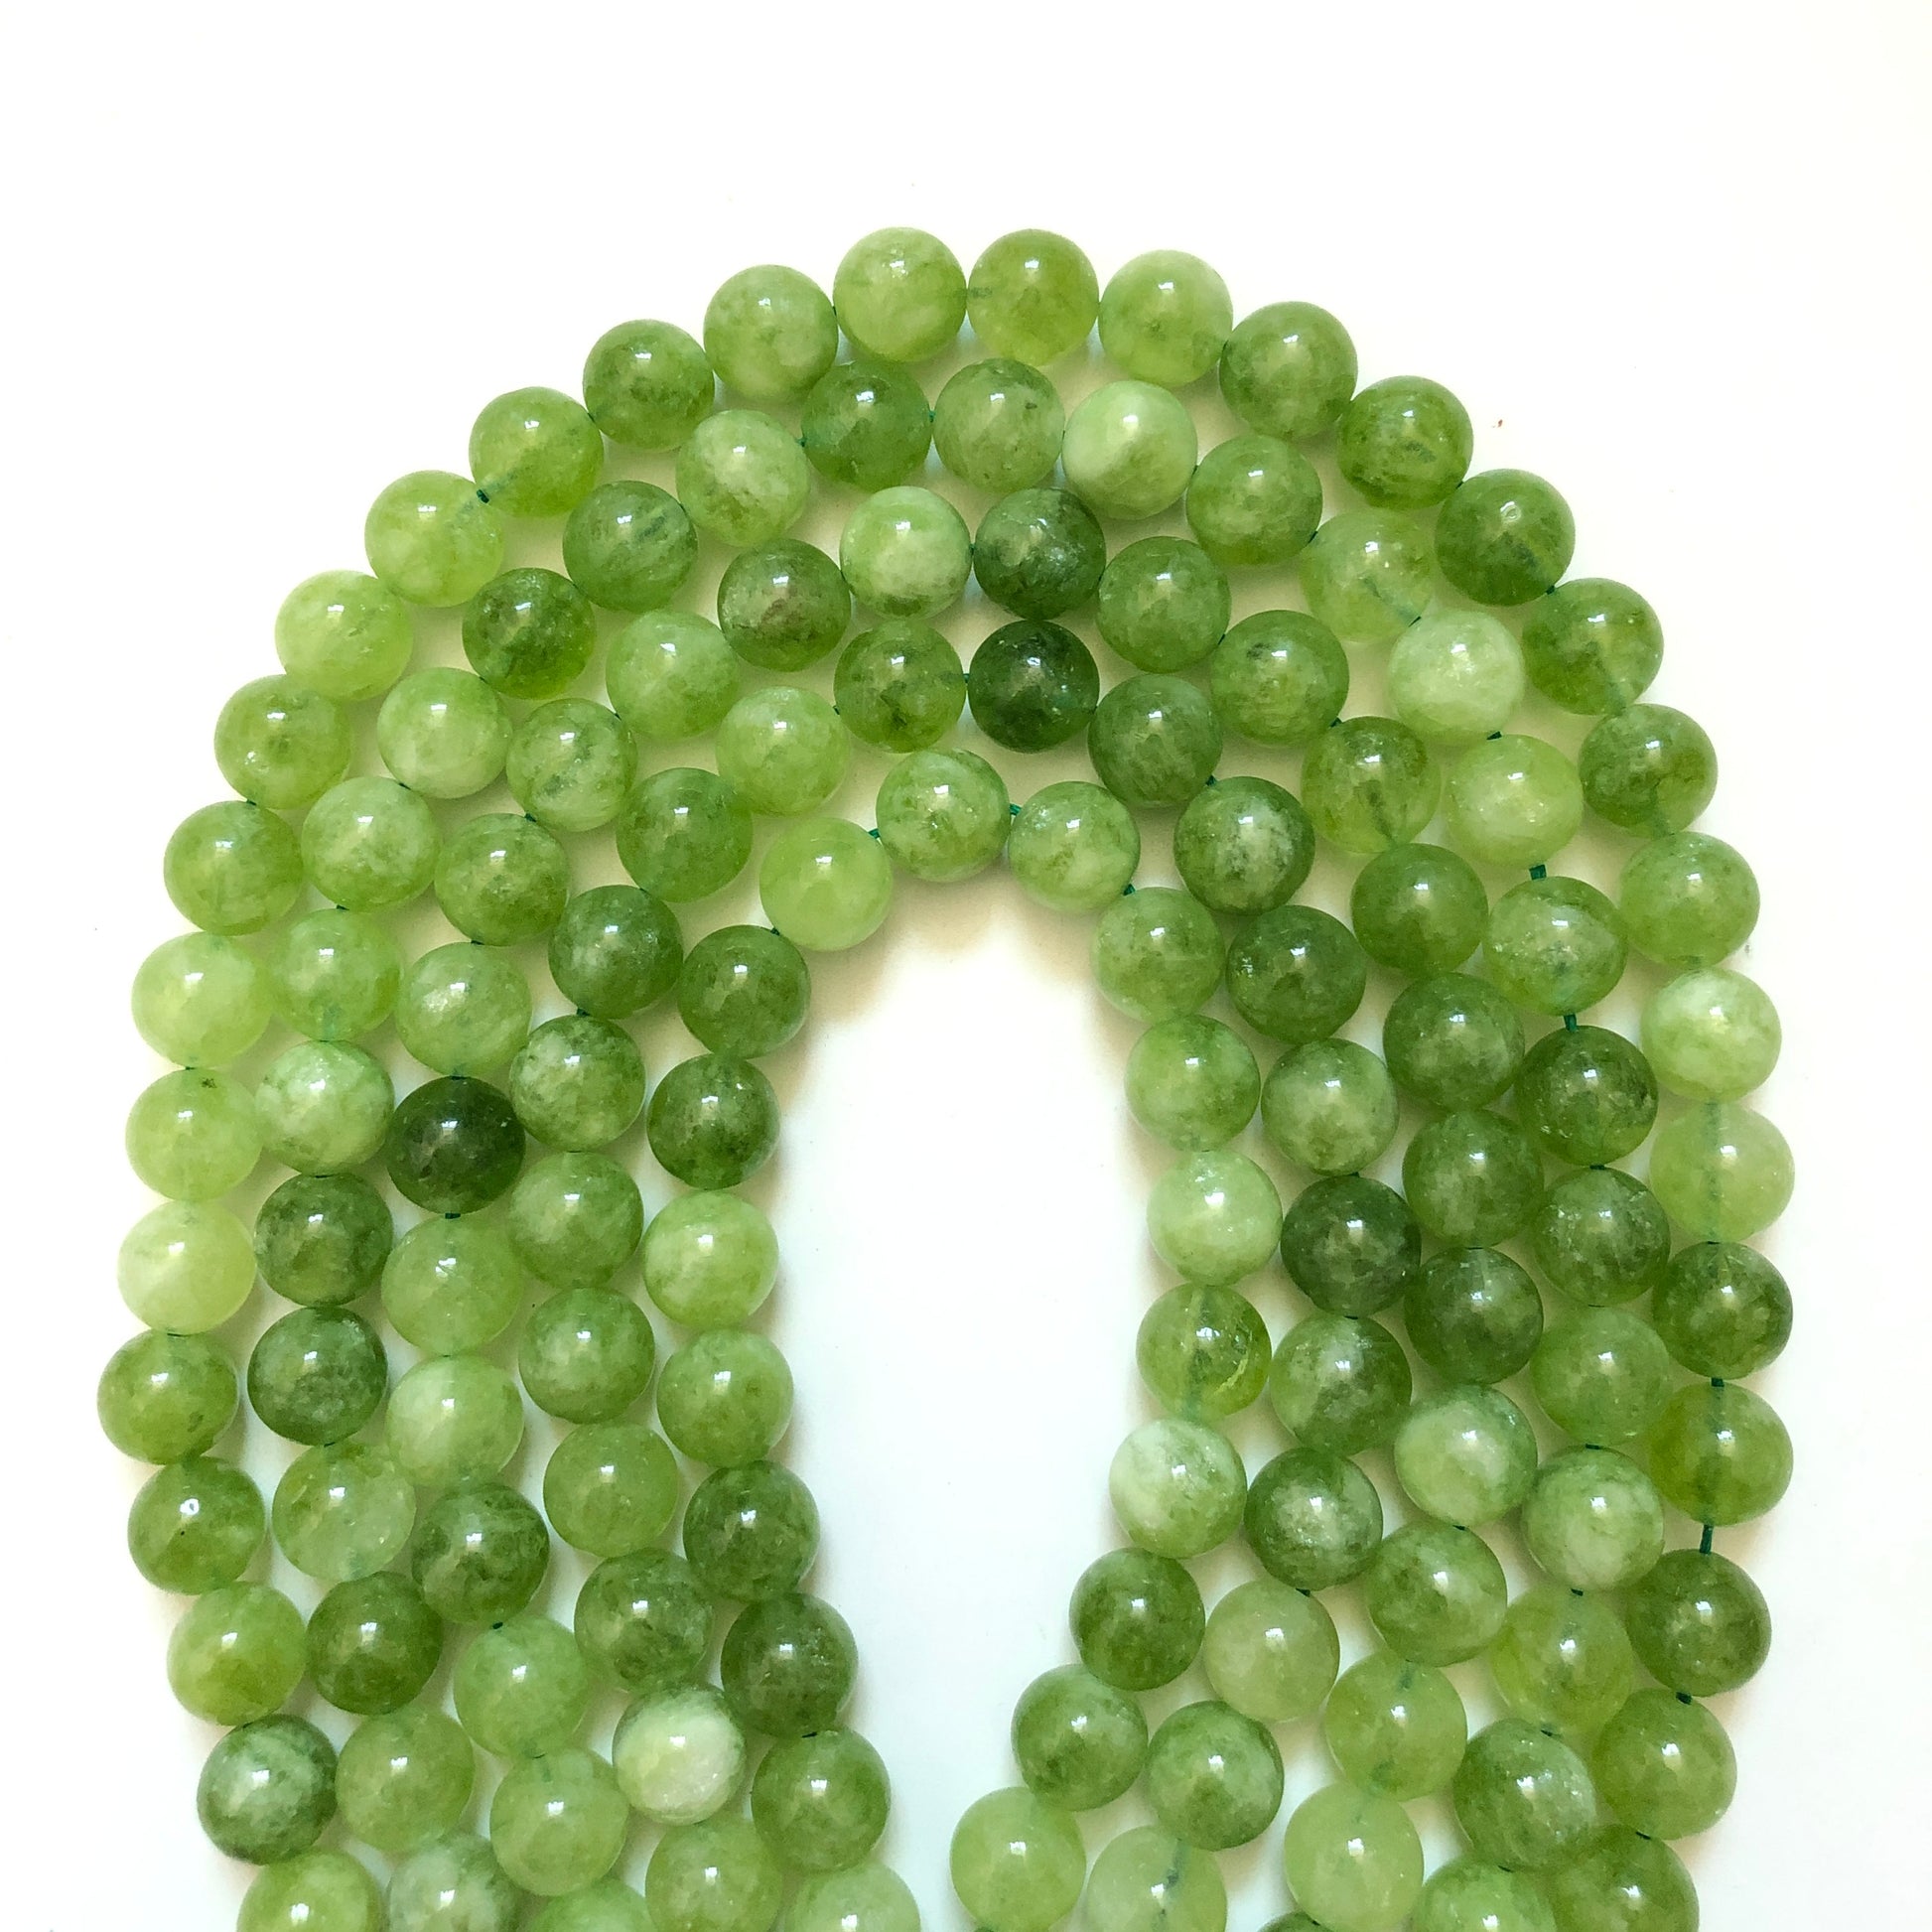 2 Strands/lot 10mm Olive Green Quartz Round Stone Beads Stone Beads New Beads Arrivals Other Stone Beads Charms Beads Beyond